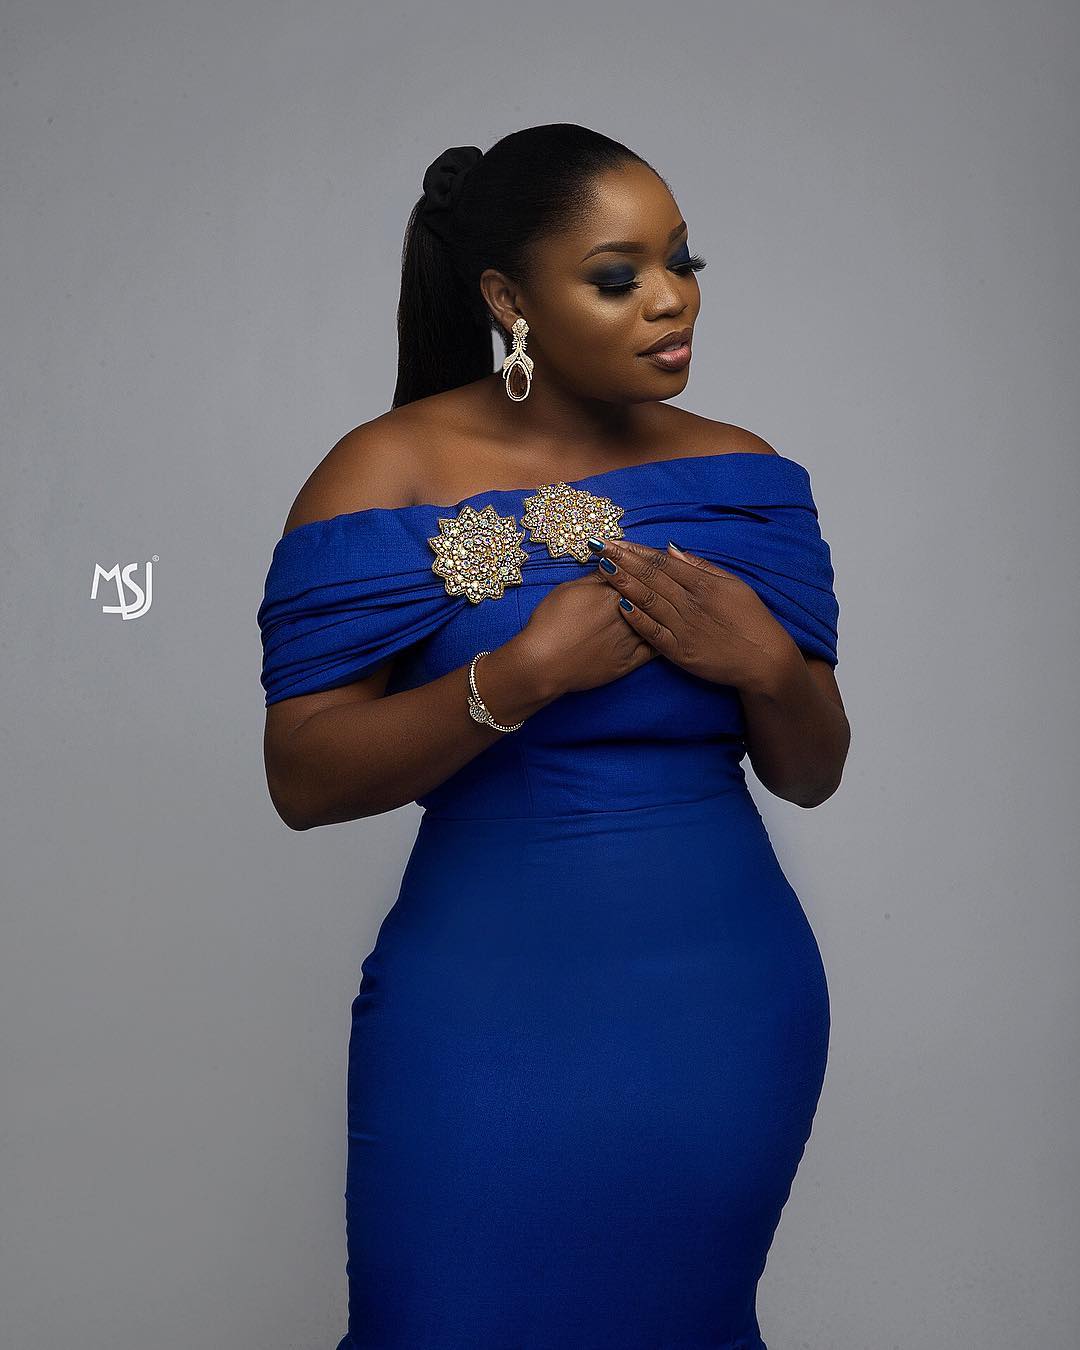 Bisola Aiyeola Celebrates her 33rd Birthday with Adorable New Photos